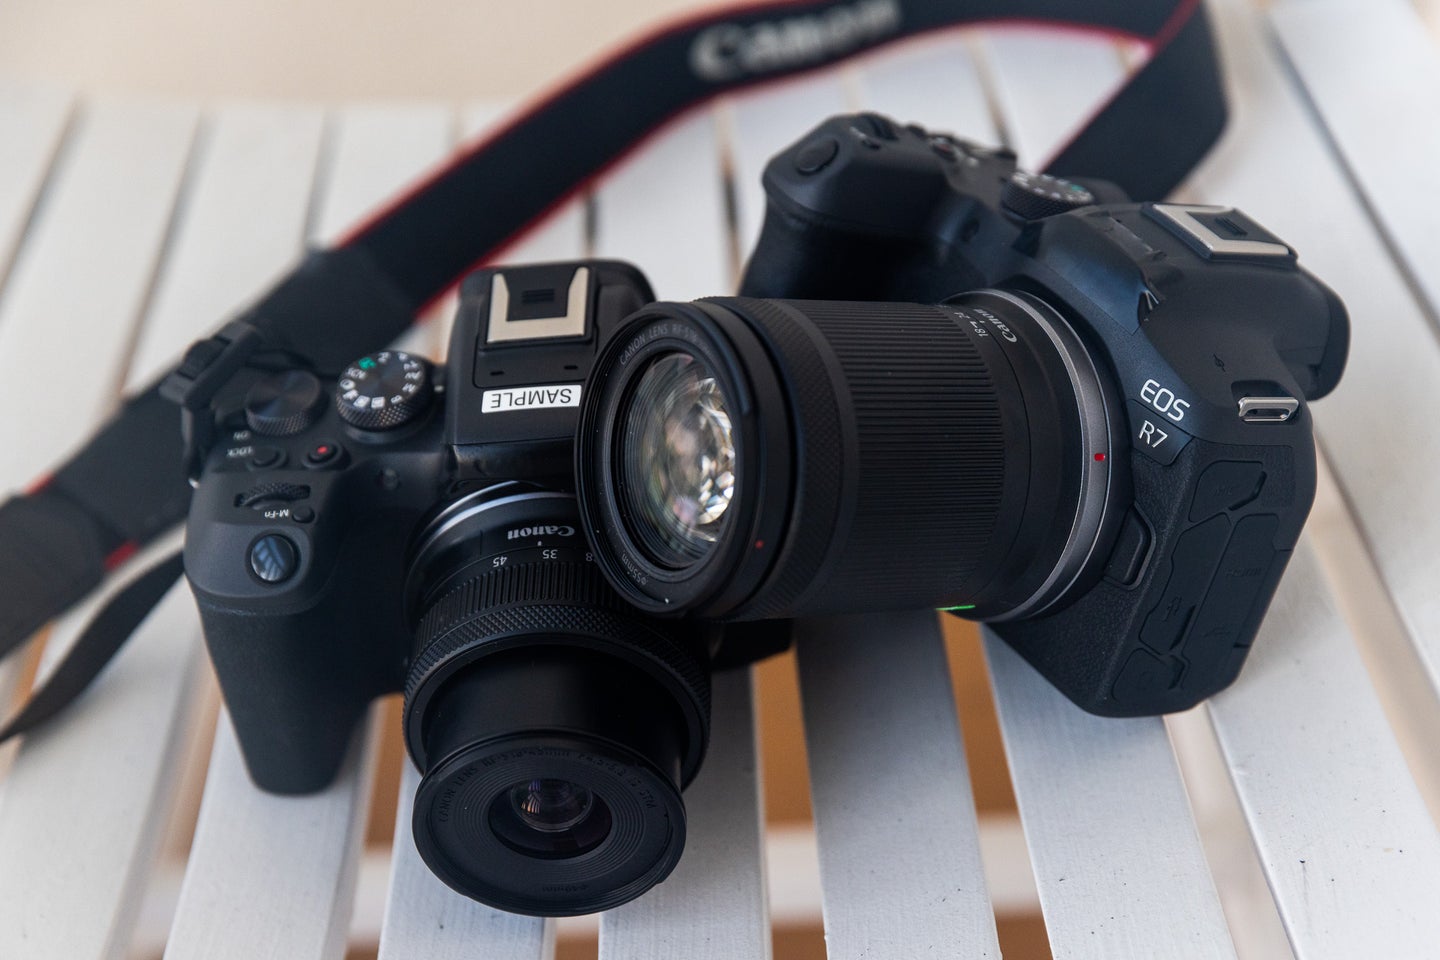 Canon EOS R7 review: An APS-C mirrorless camera built for speed